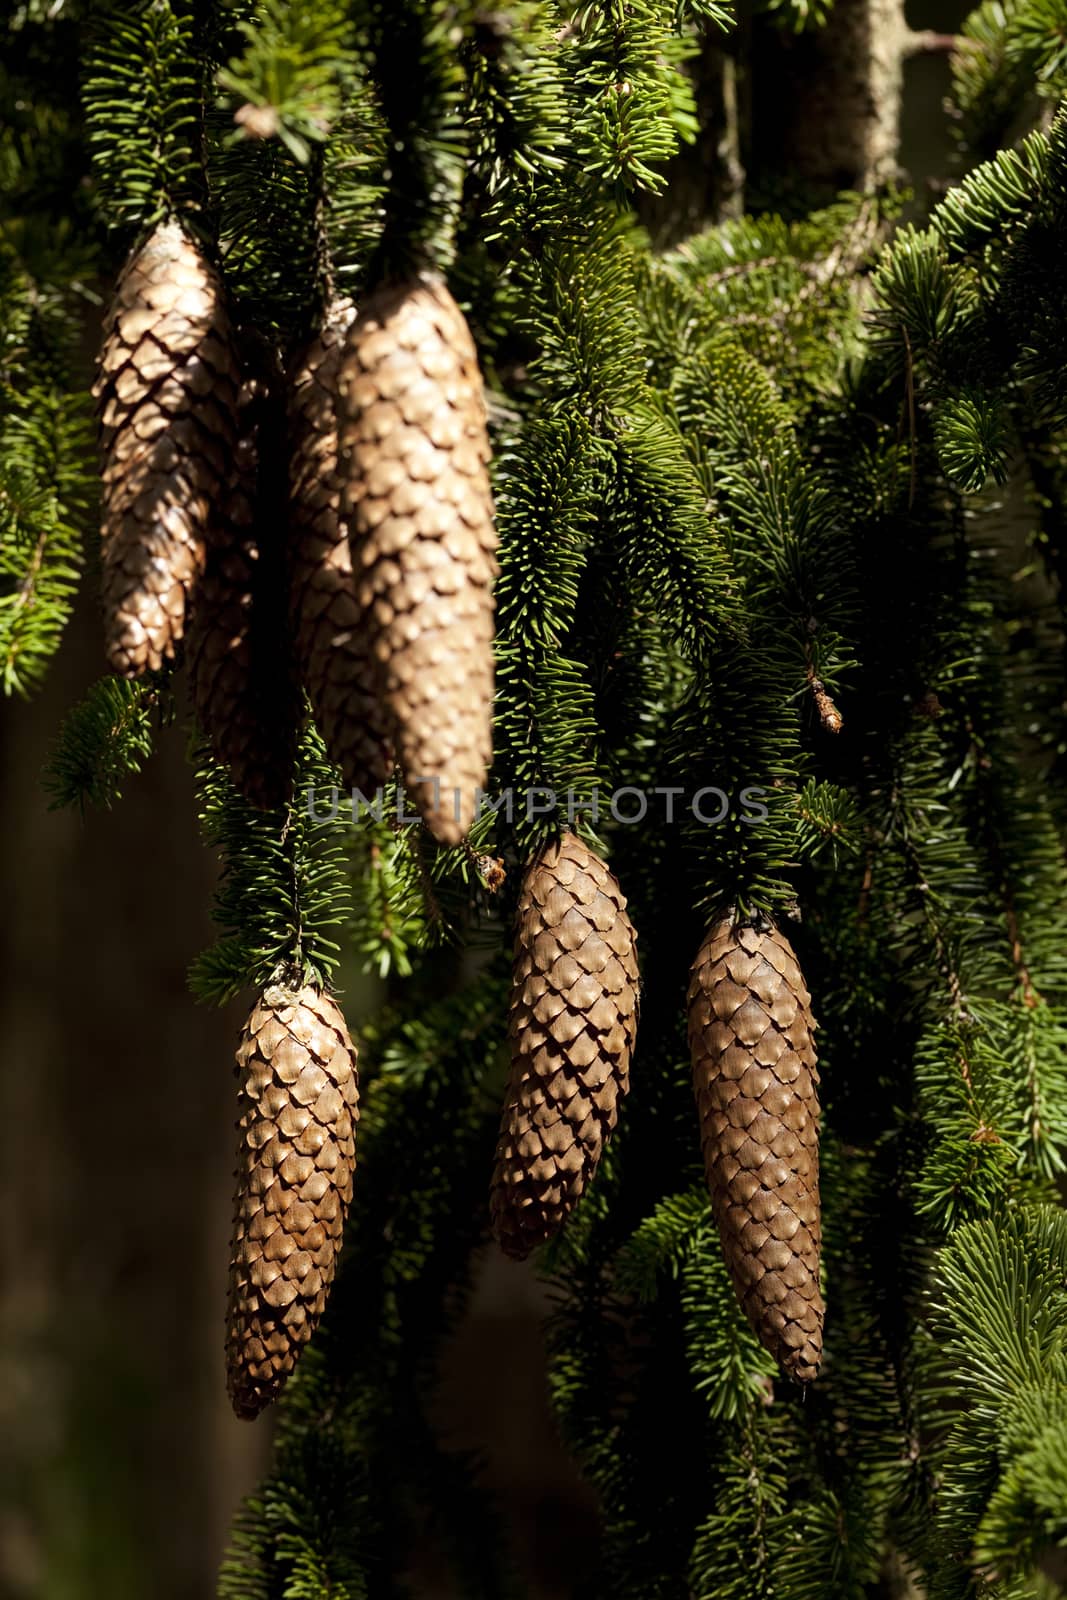 group cone hang on branch spruce